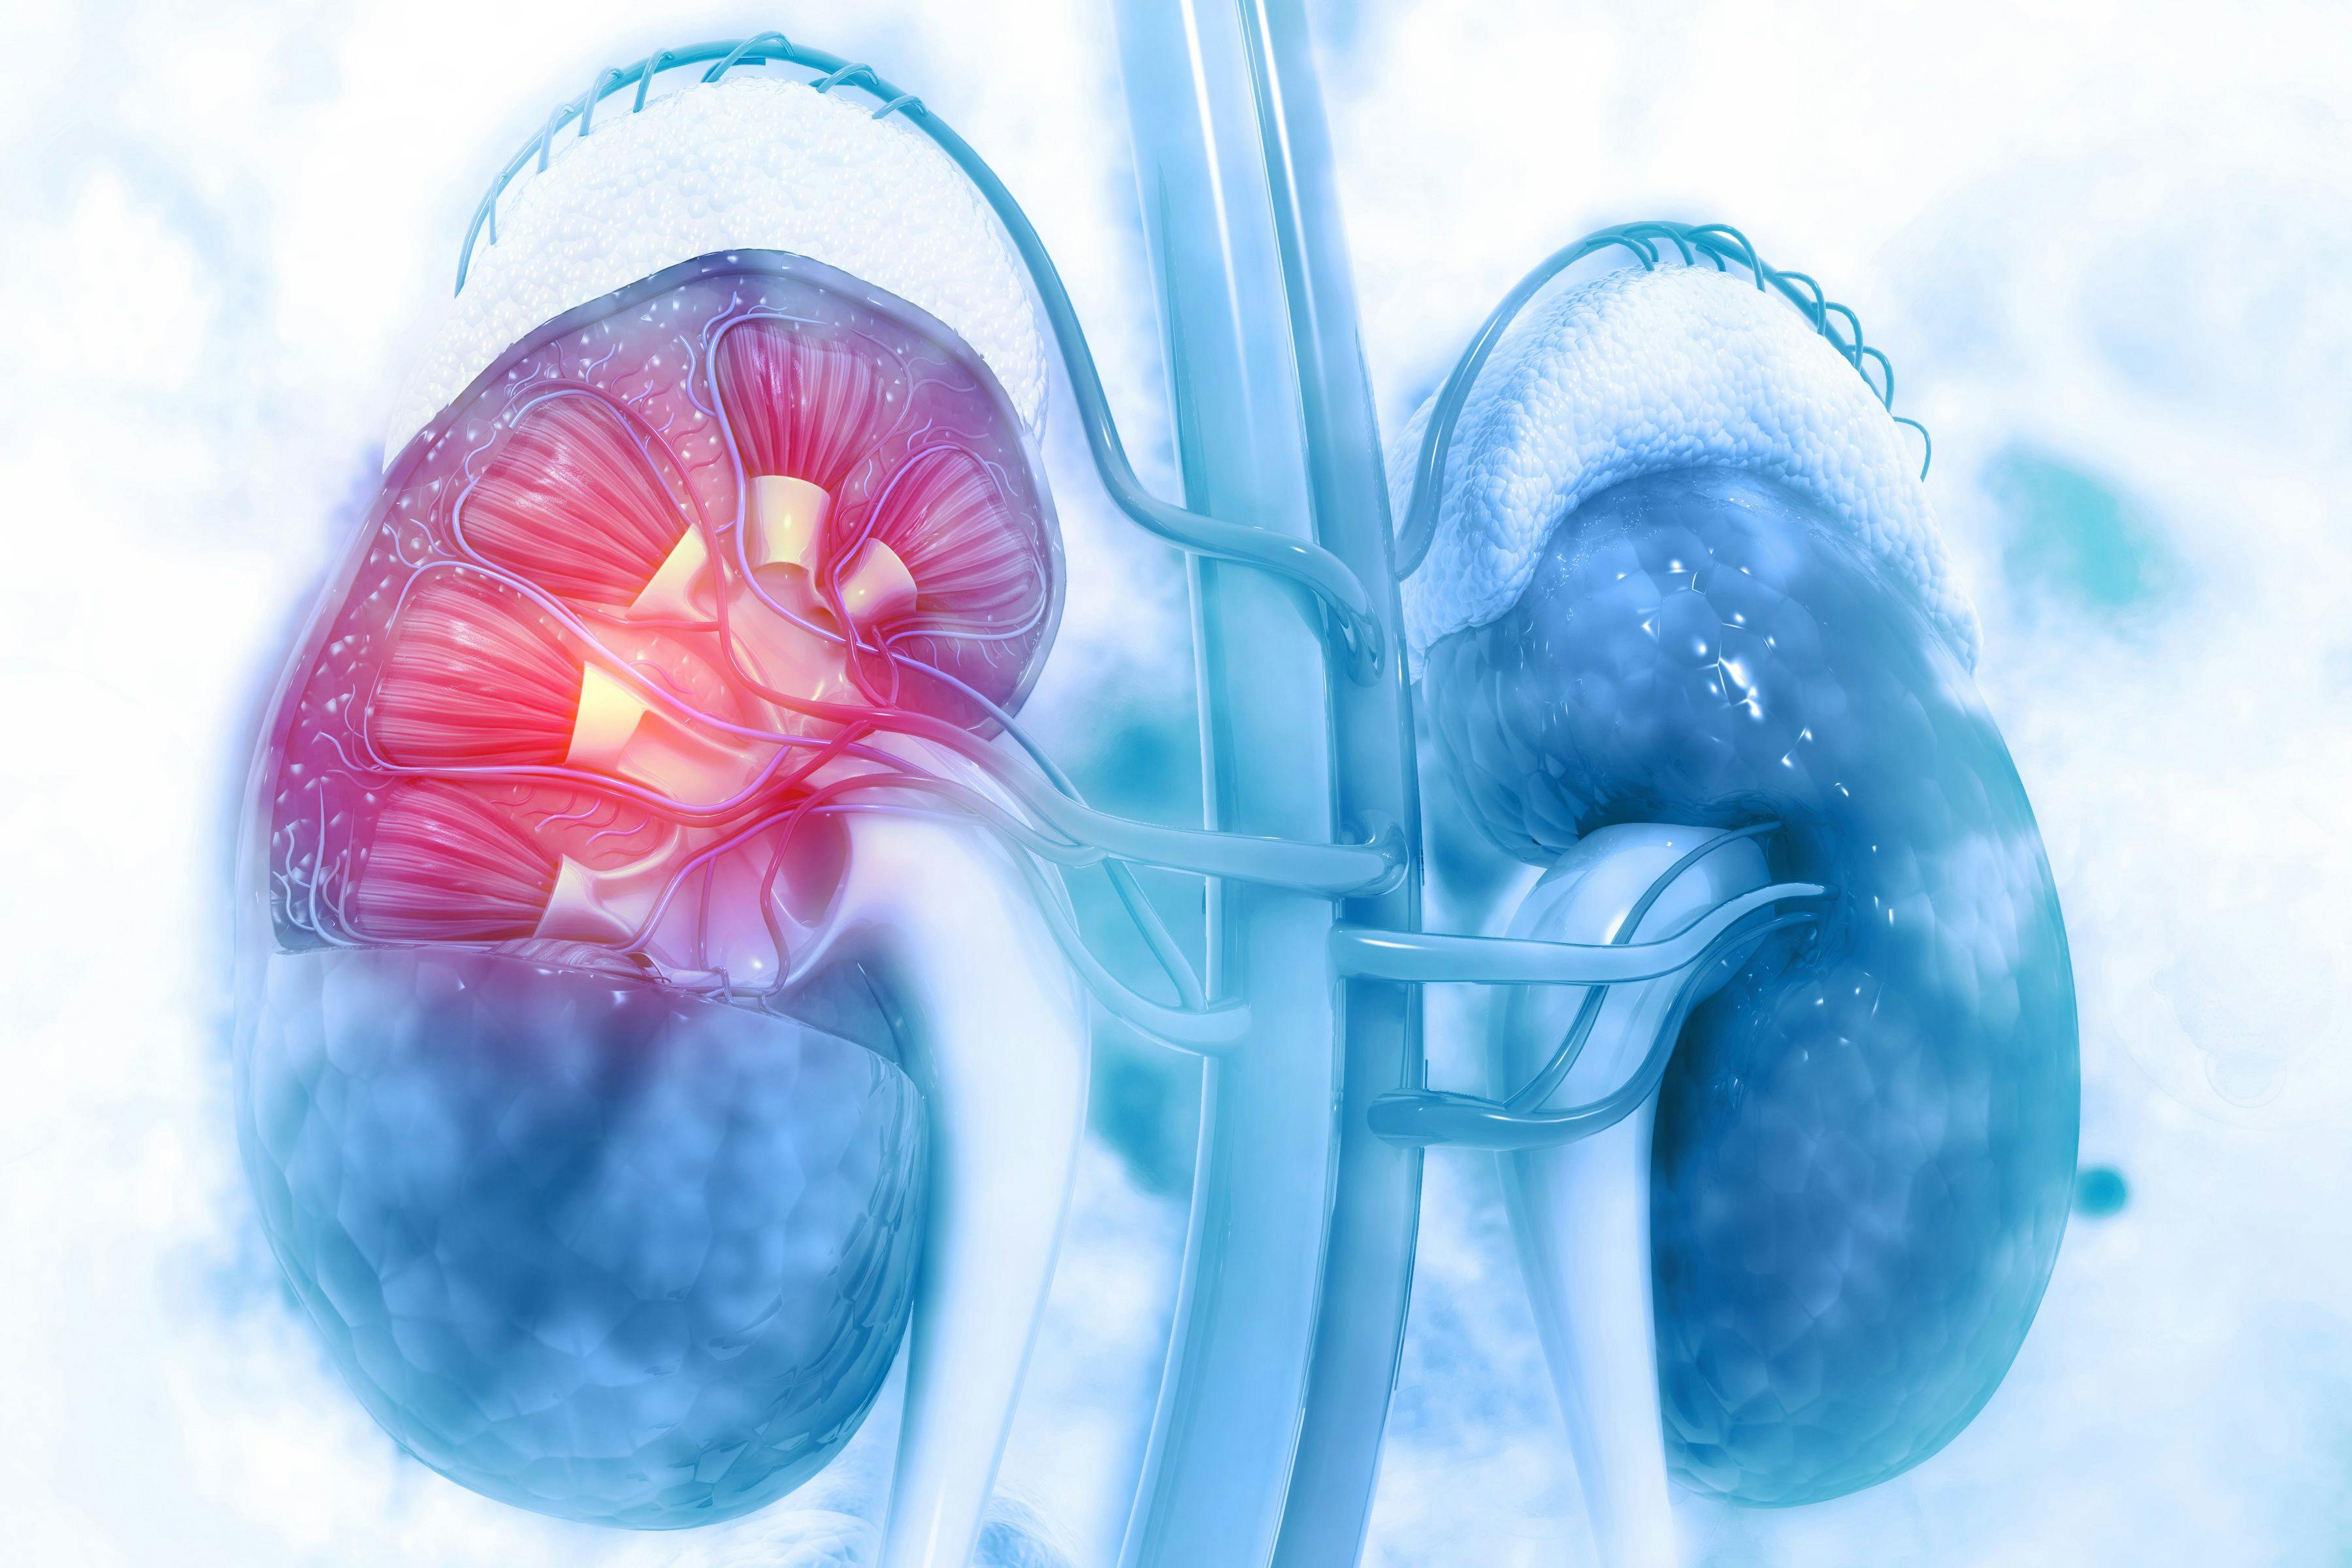 Patient with advanced renal cell carcinoma who were treated with nivolumab and ipilimumab experienced a long-term survival benefit that was superior to sunitinib.